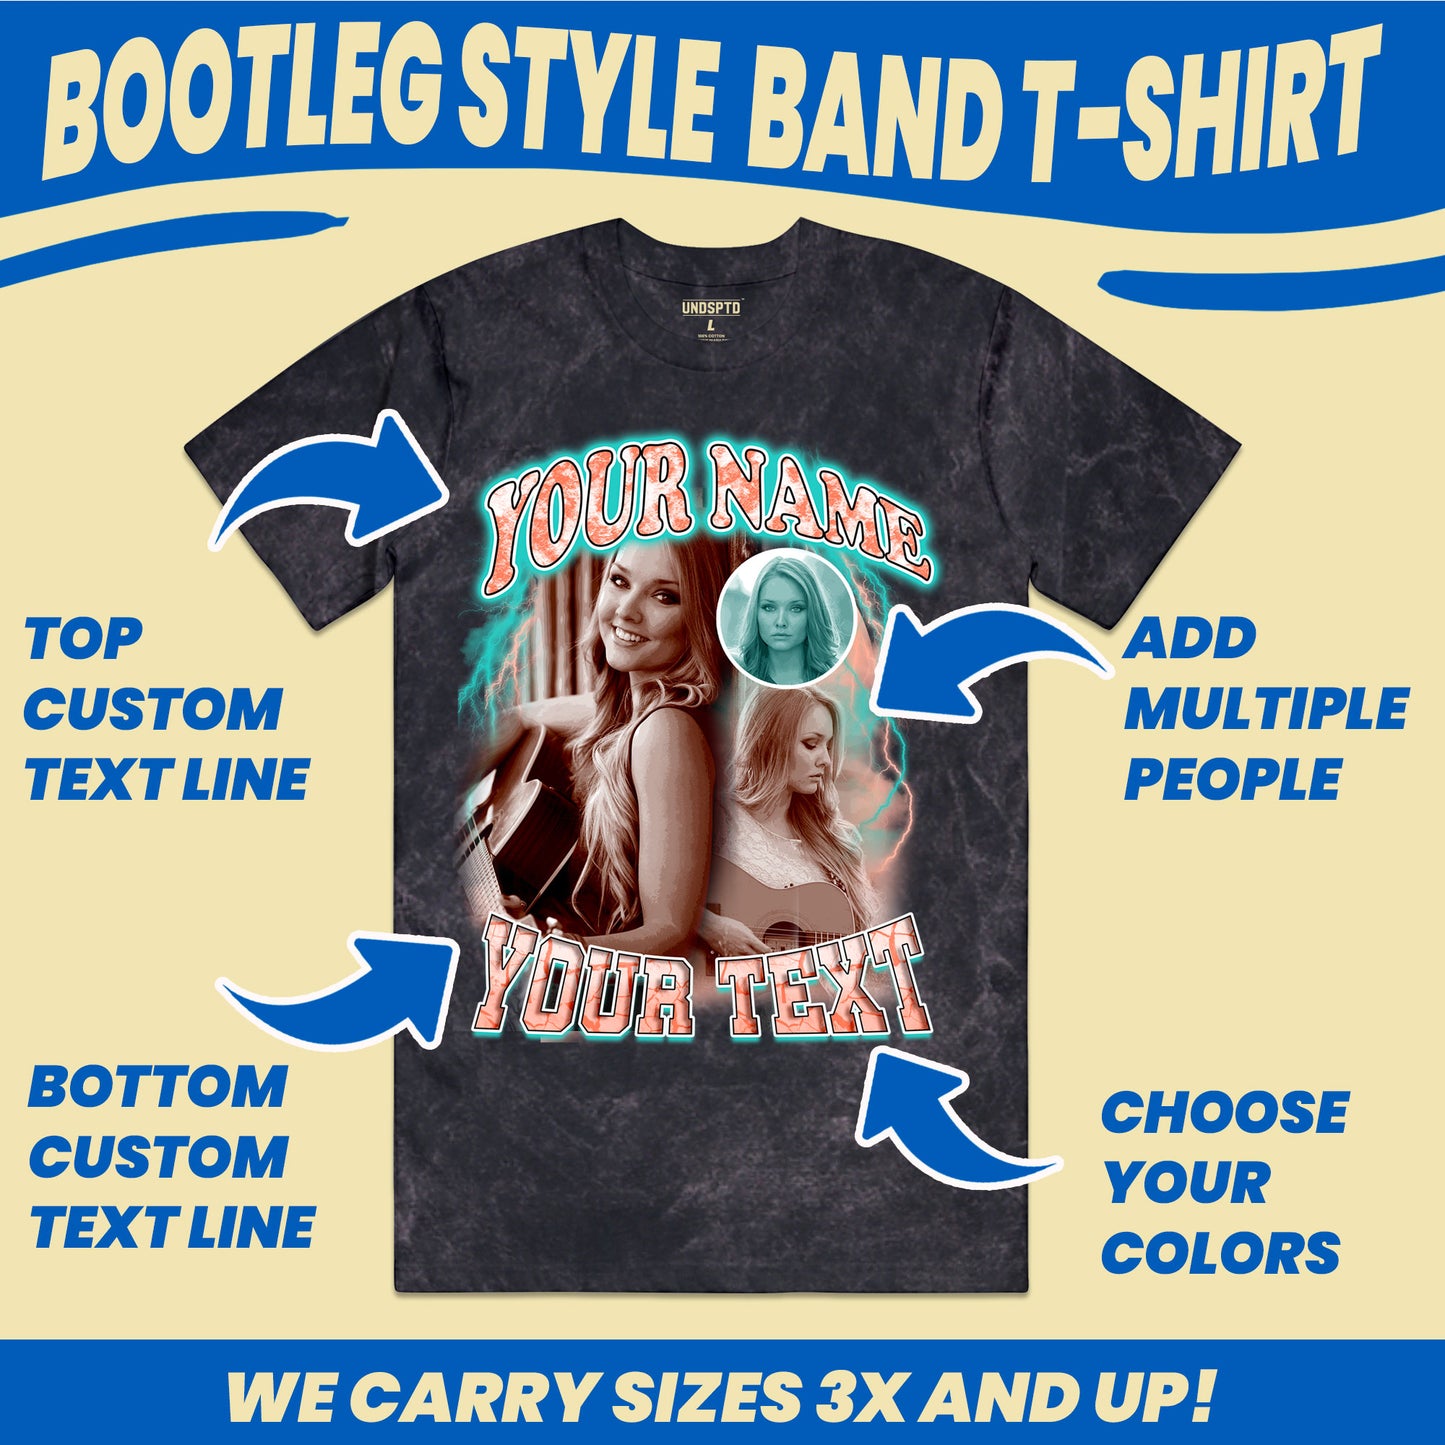 custom vintage bootleg rap band tee with photos and text customization features such as design color, multiple photos to add and custom text